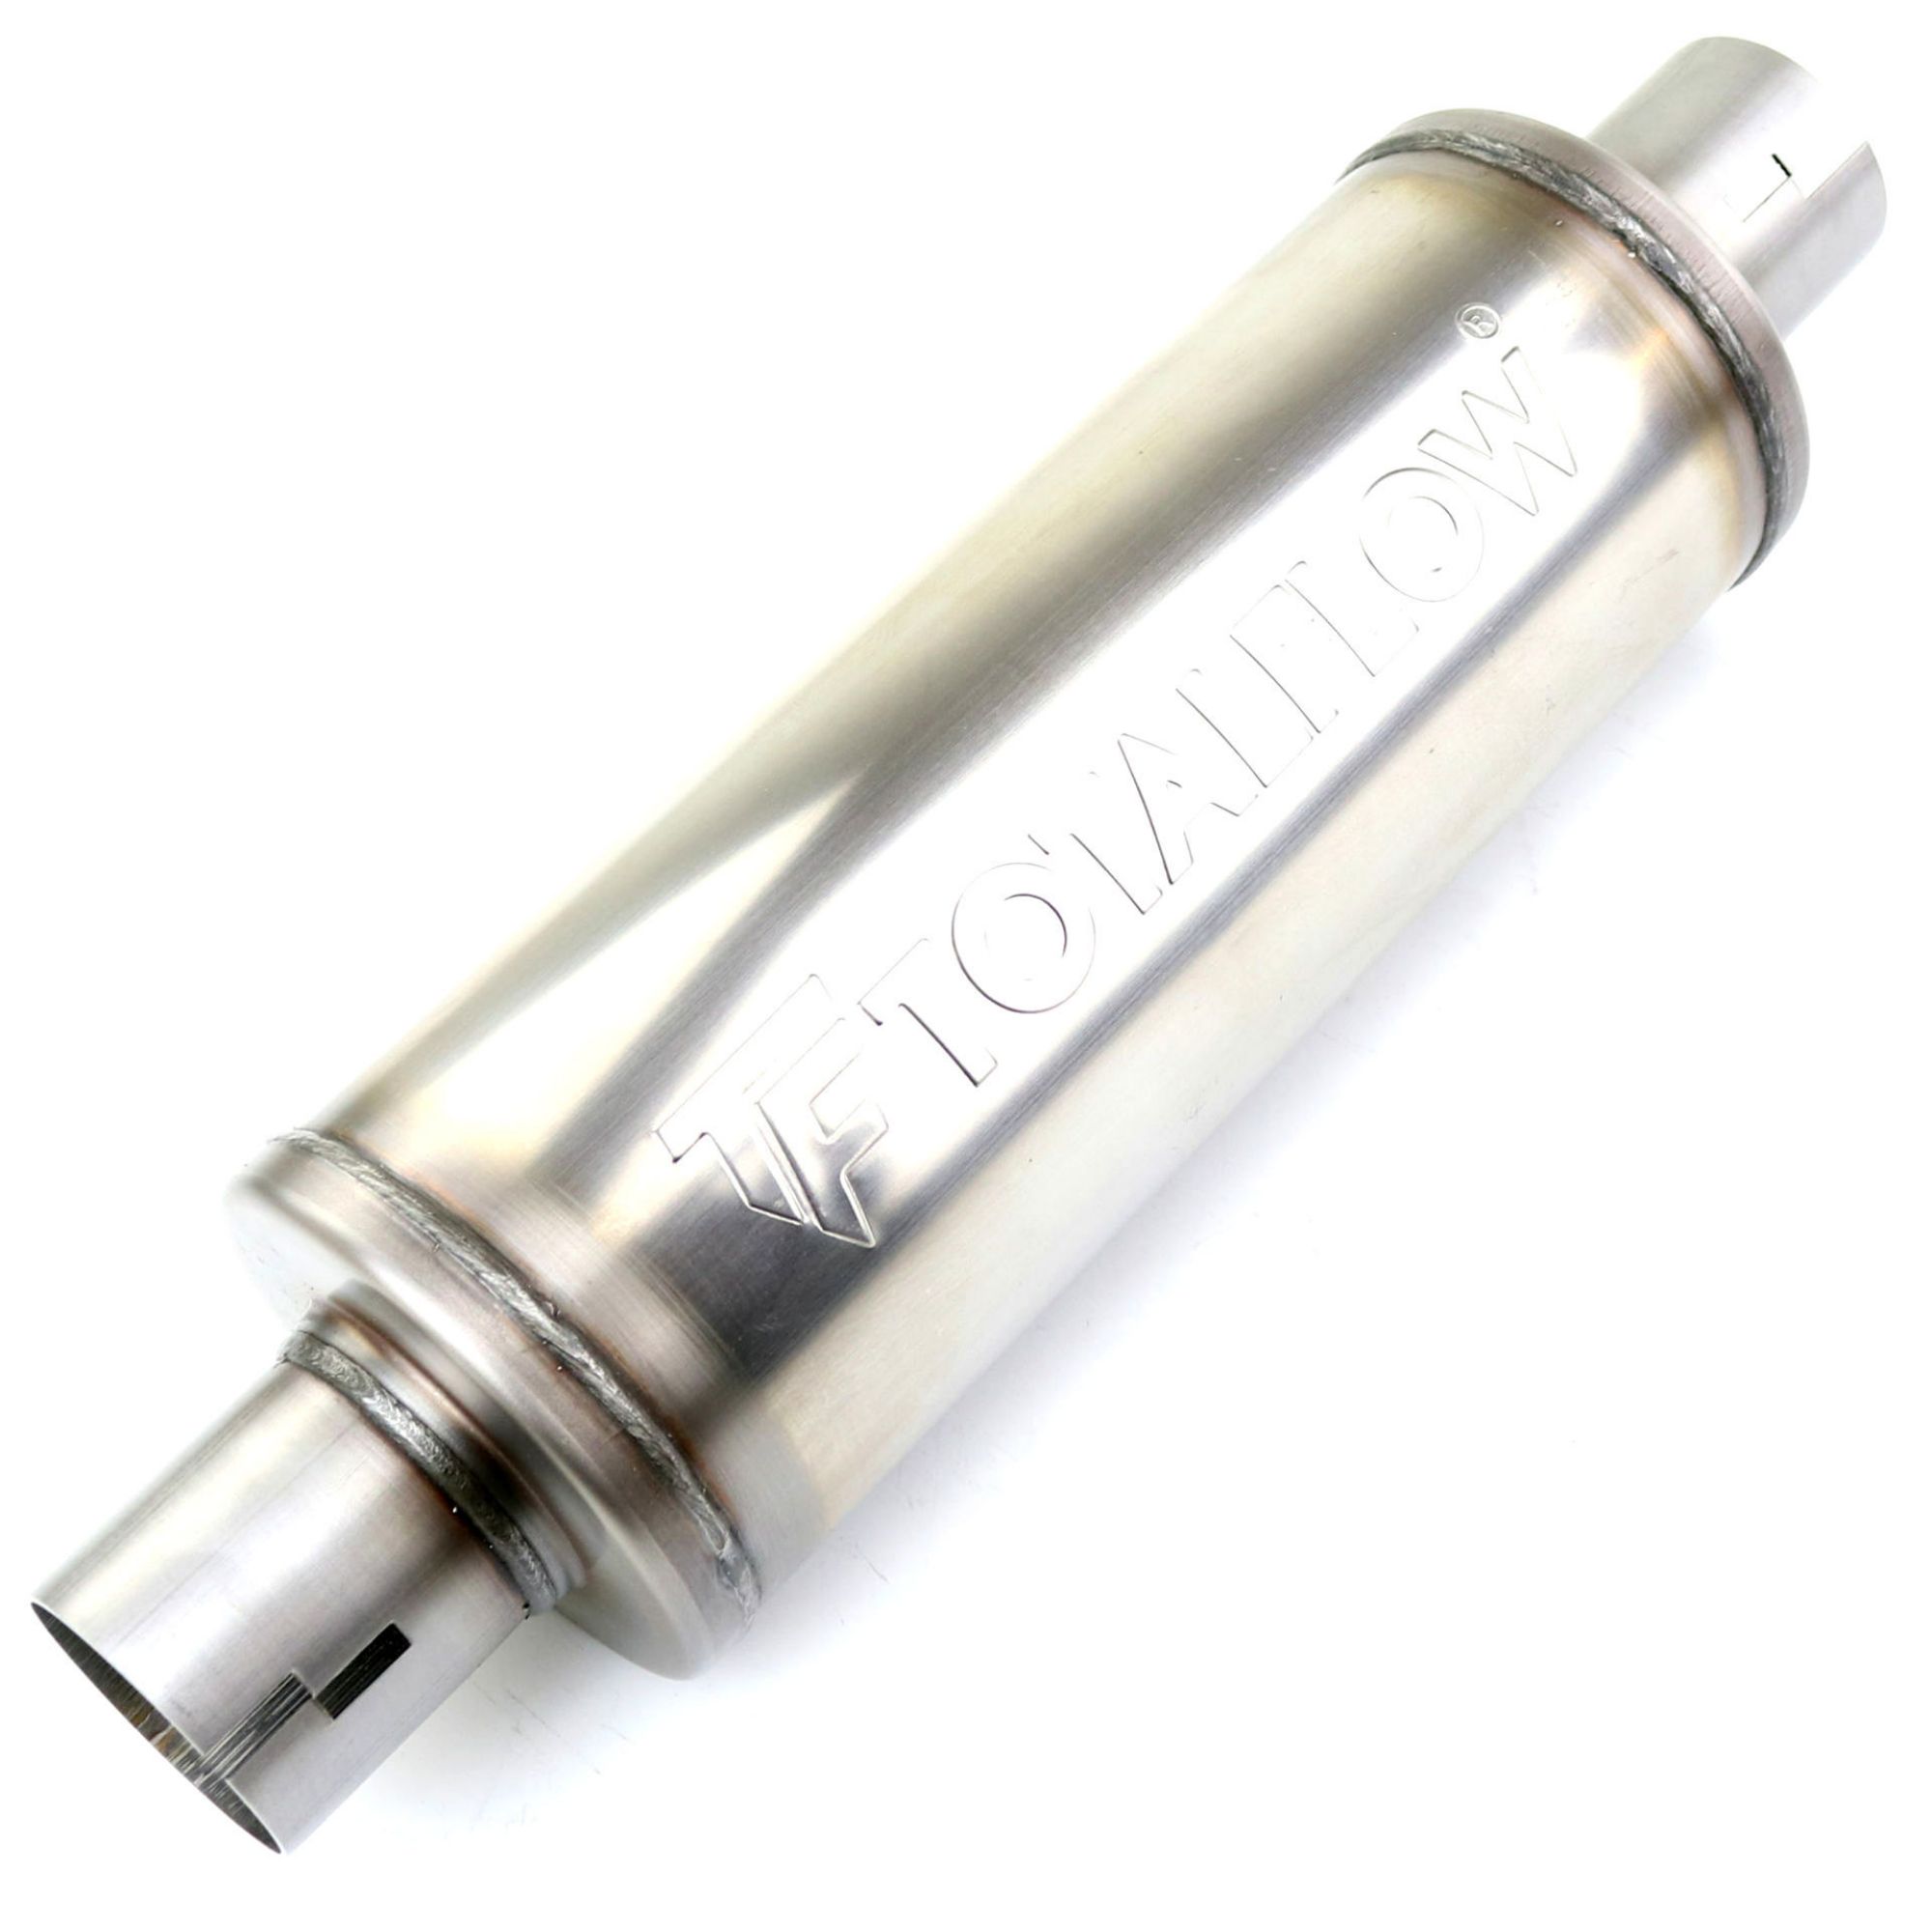 TOTALFLOW 20420N Straight Through Universal 3-1/2" Inch Notched Ends Exhaust Muffler - 3.5 Inch ID